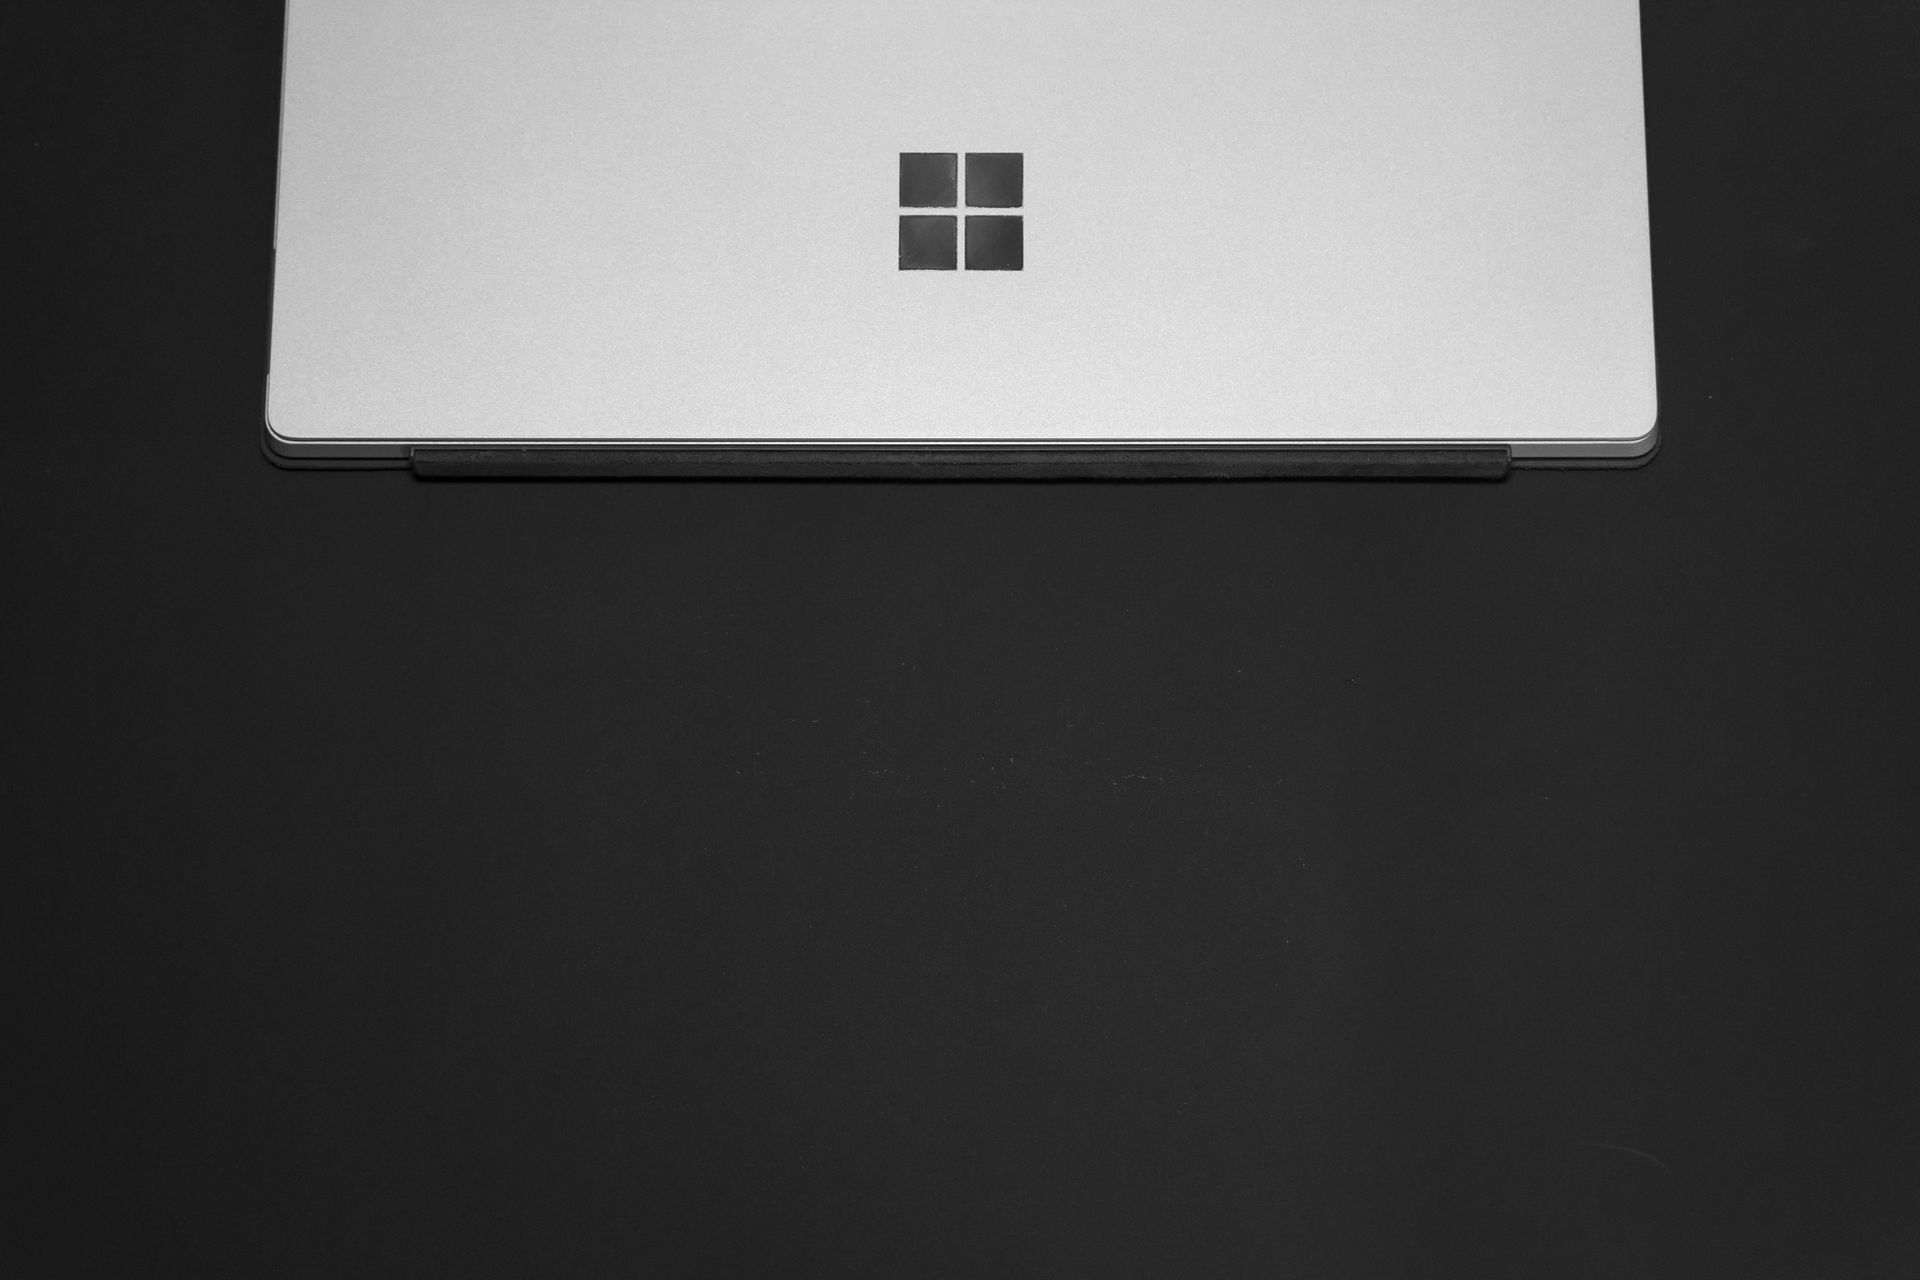 New Surface devices might arrive in two waves, with the first wave of Intel-based models launching in April 2024, and ARM-based models following in June 2024